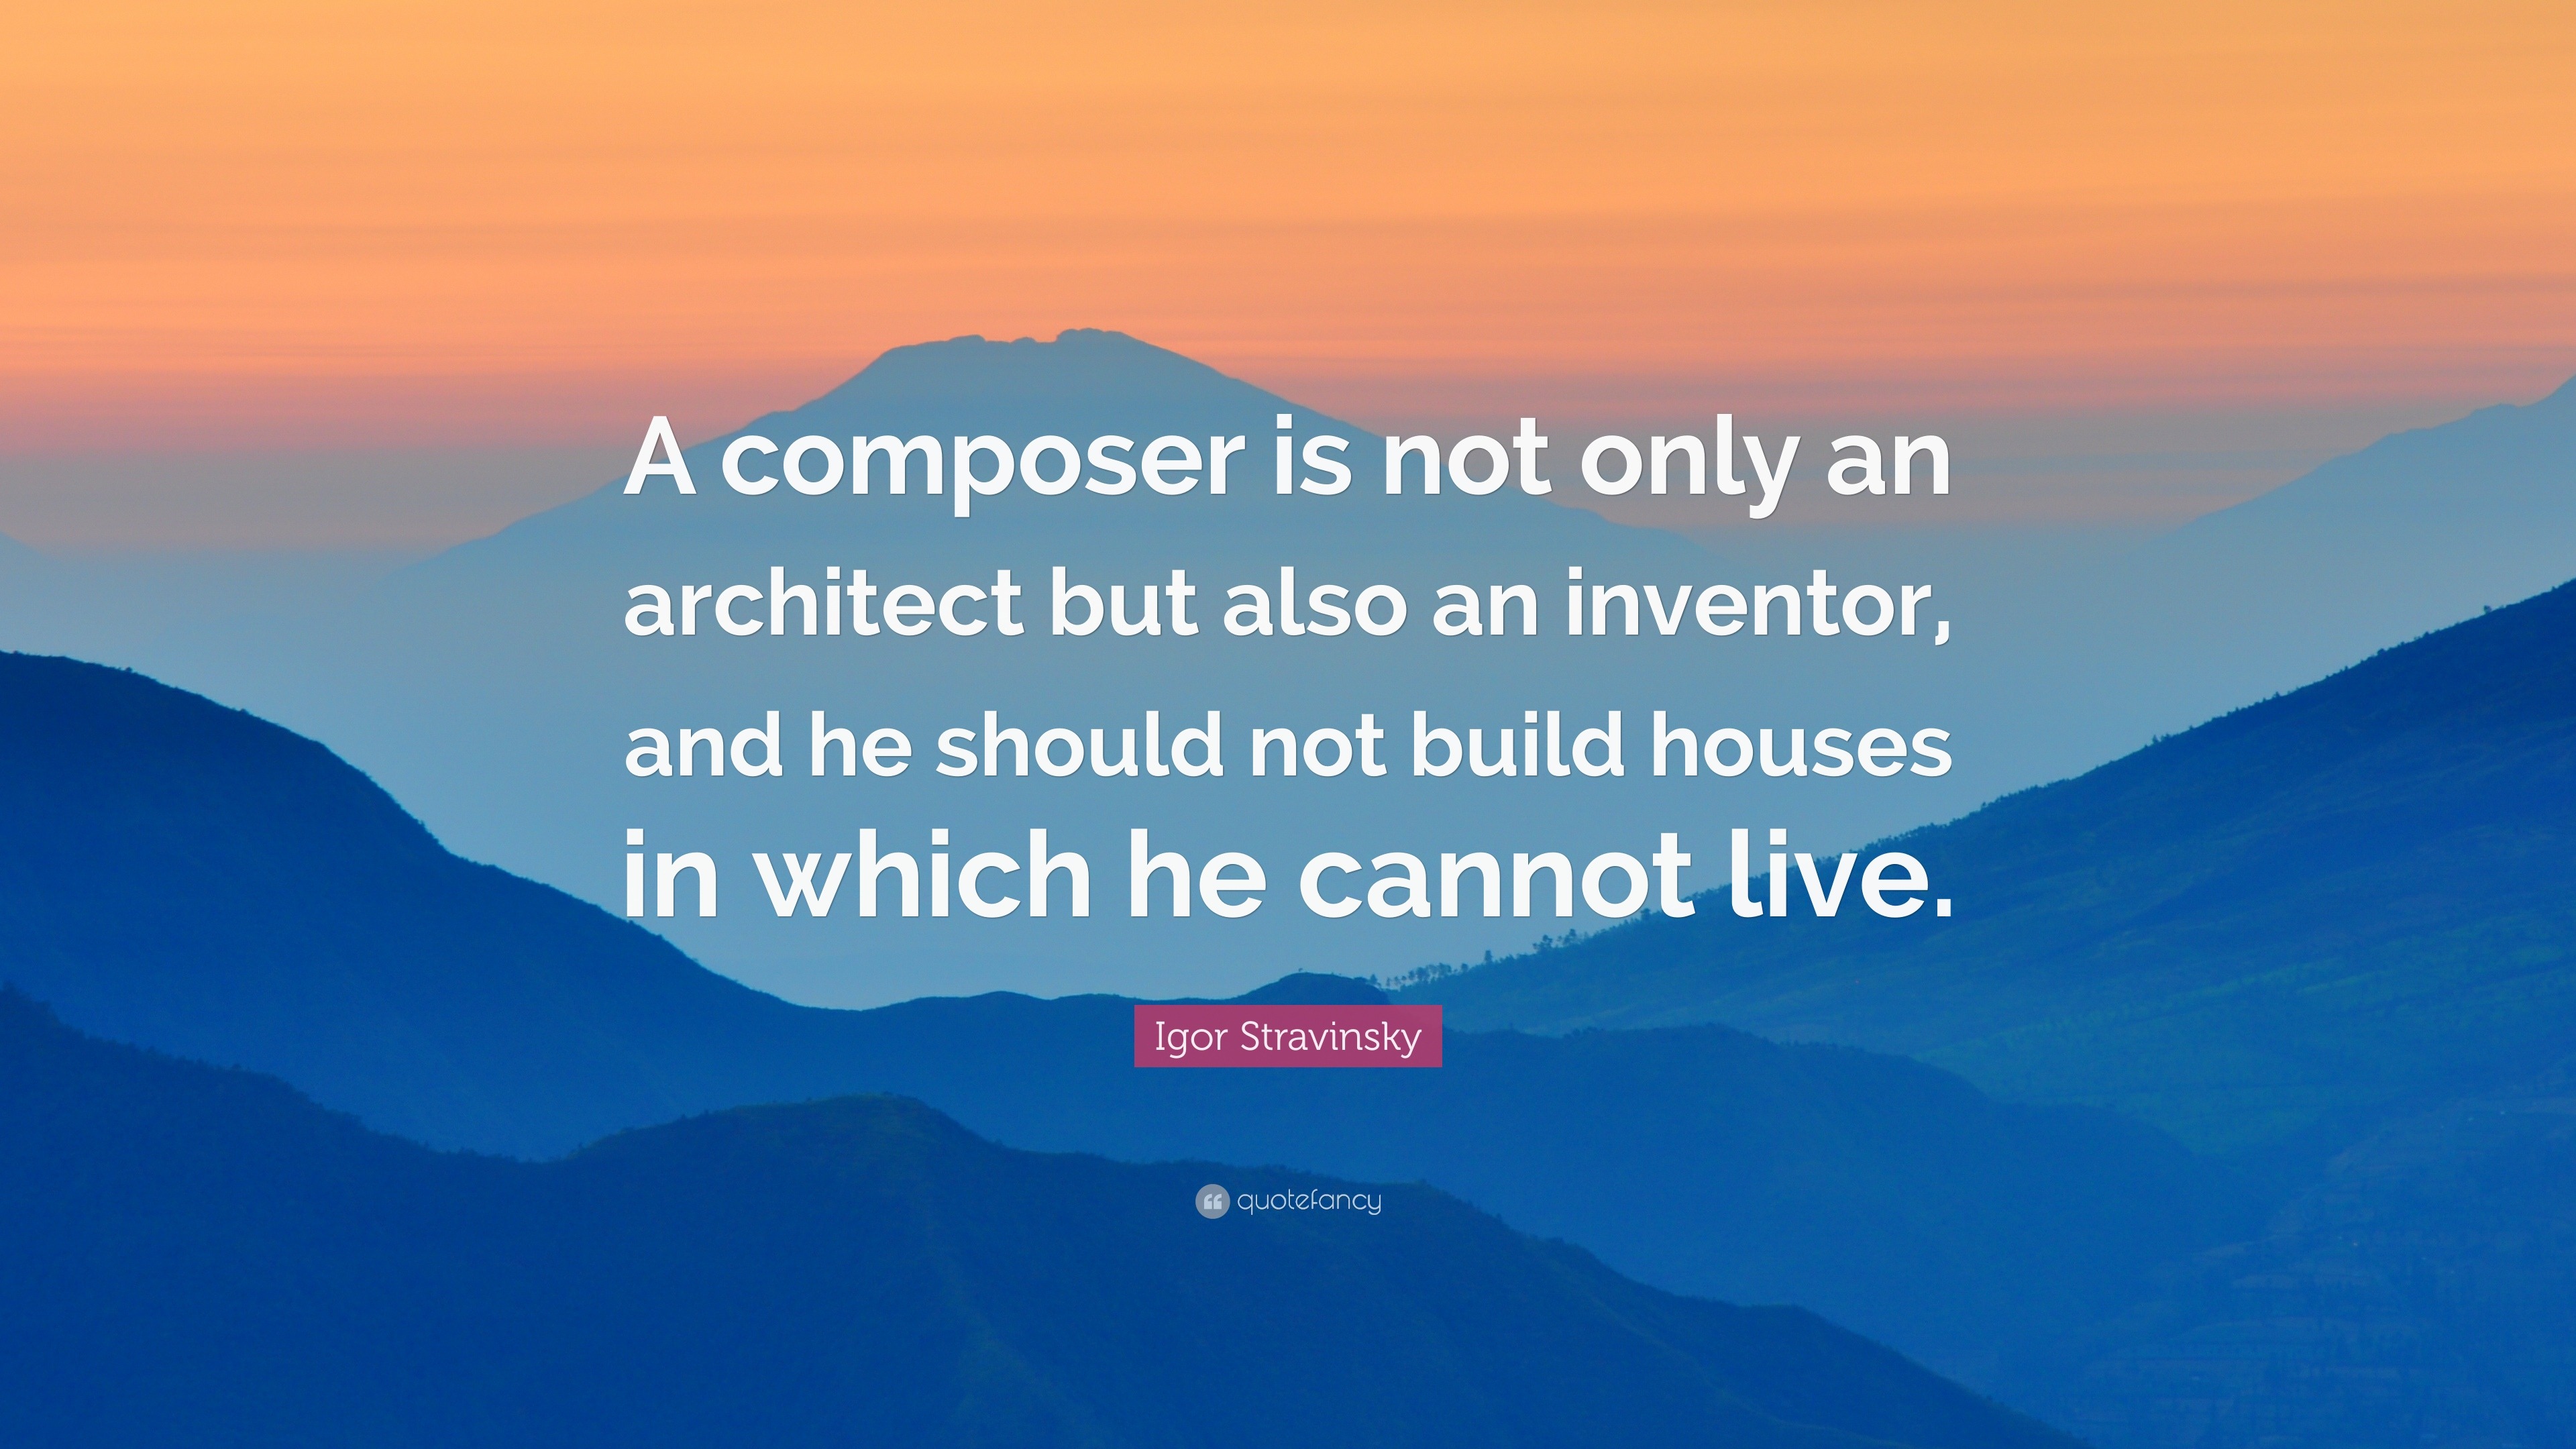 Igor Stravinsky Quote: “A composer is not only an architect but also an ...